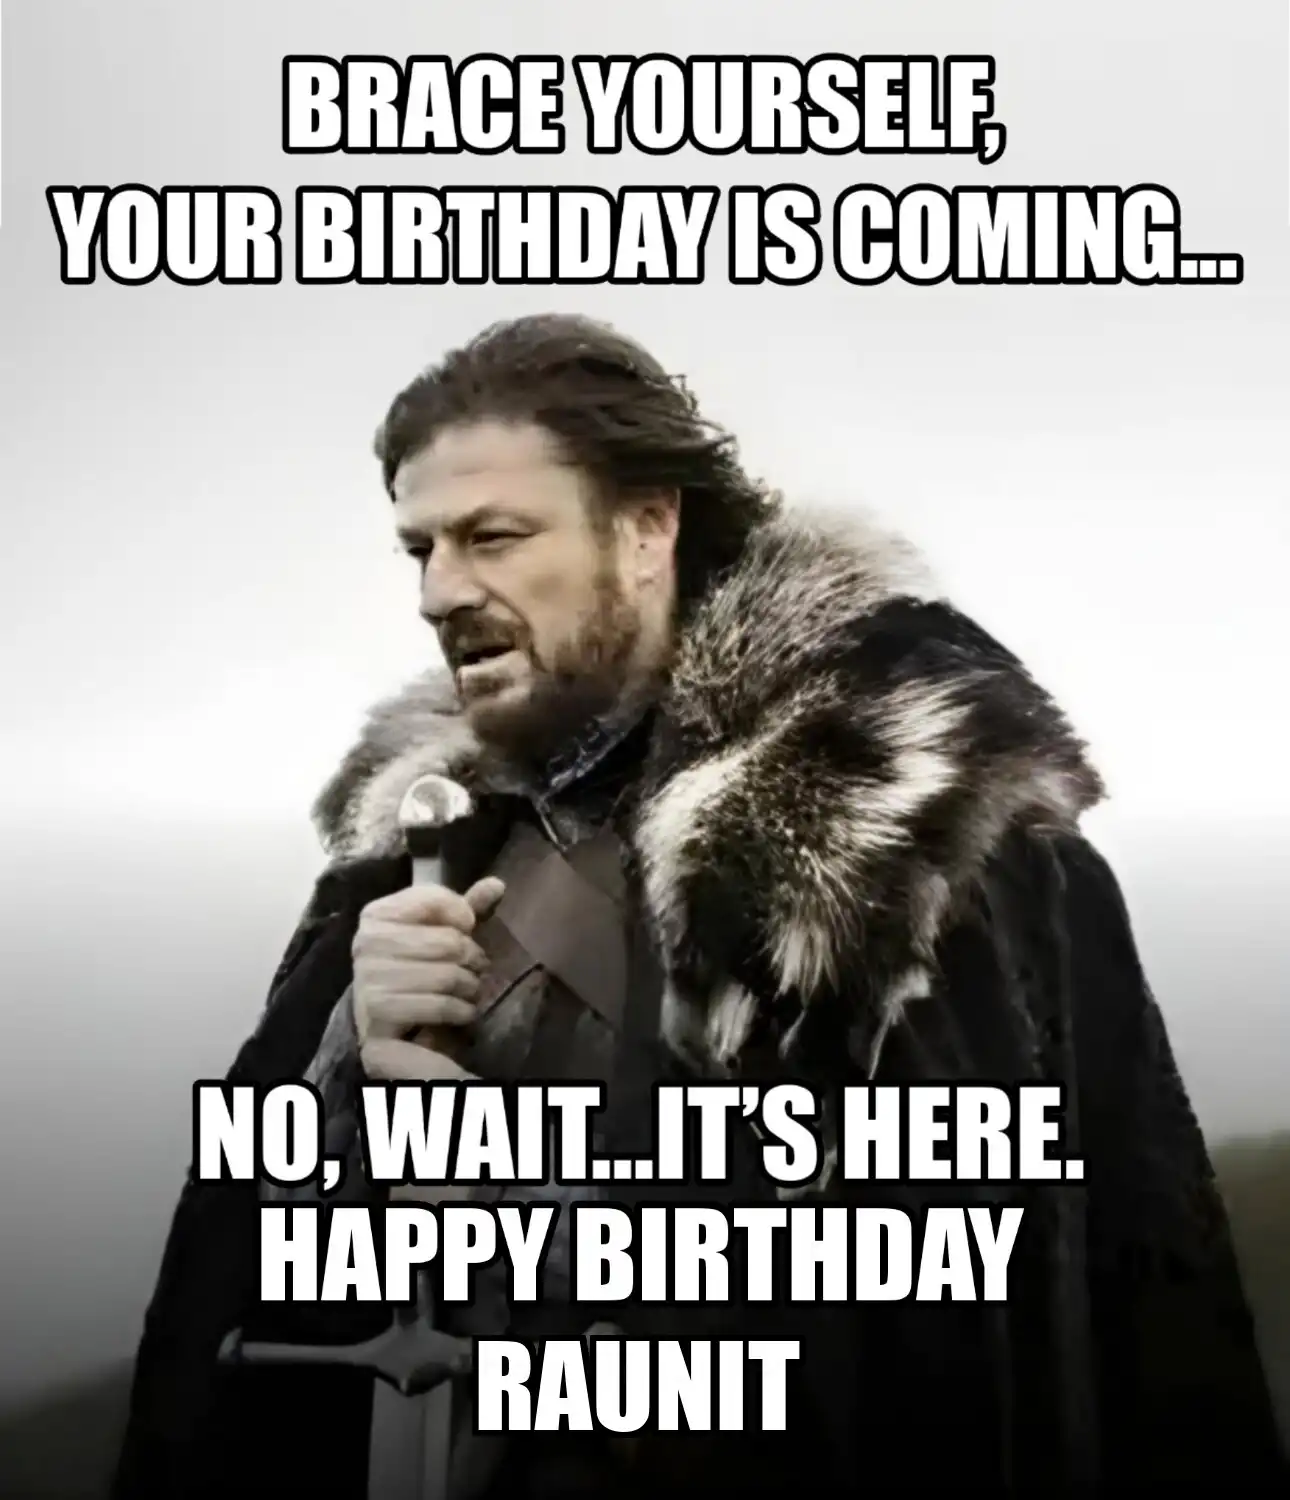 Happy Birthday Raunit Brace Yourself Your Birthday Is Coming Meme